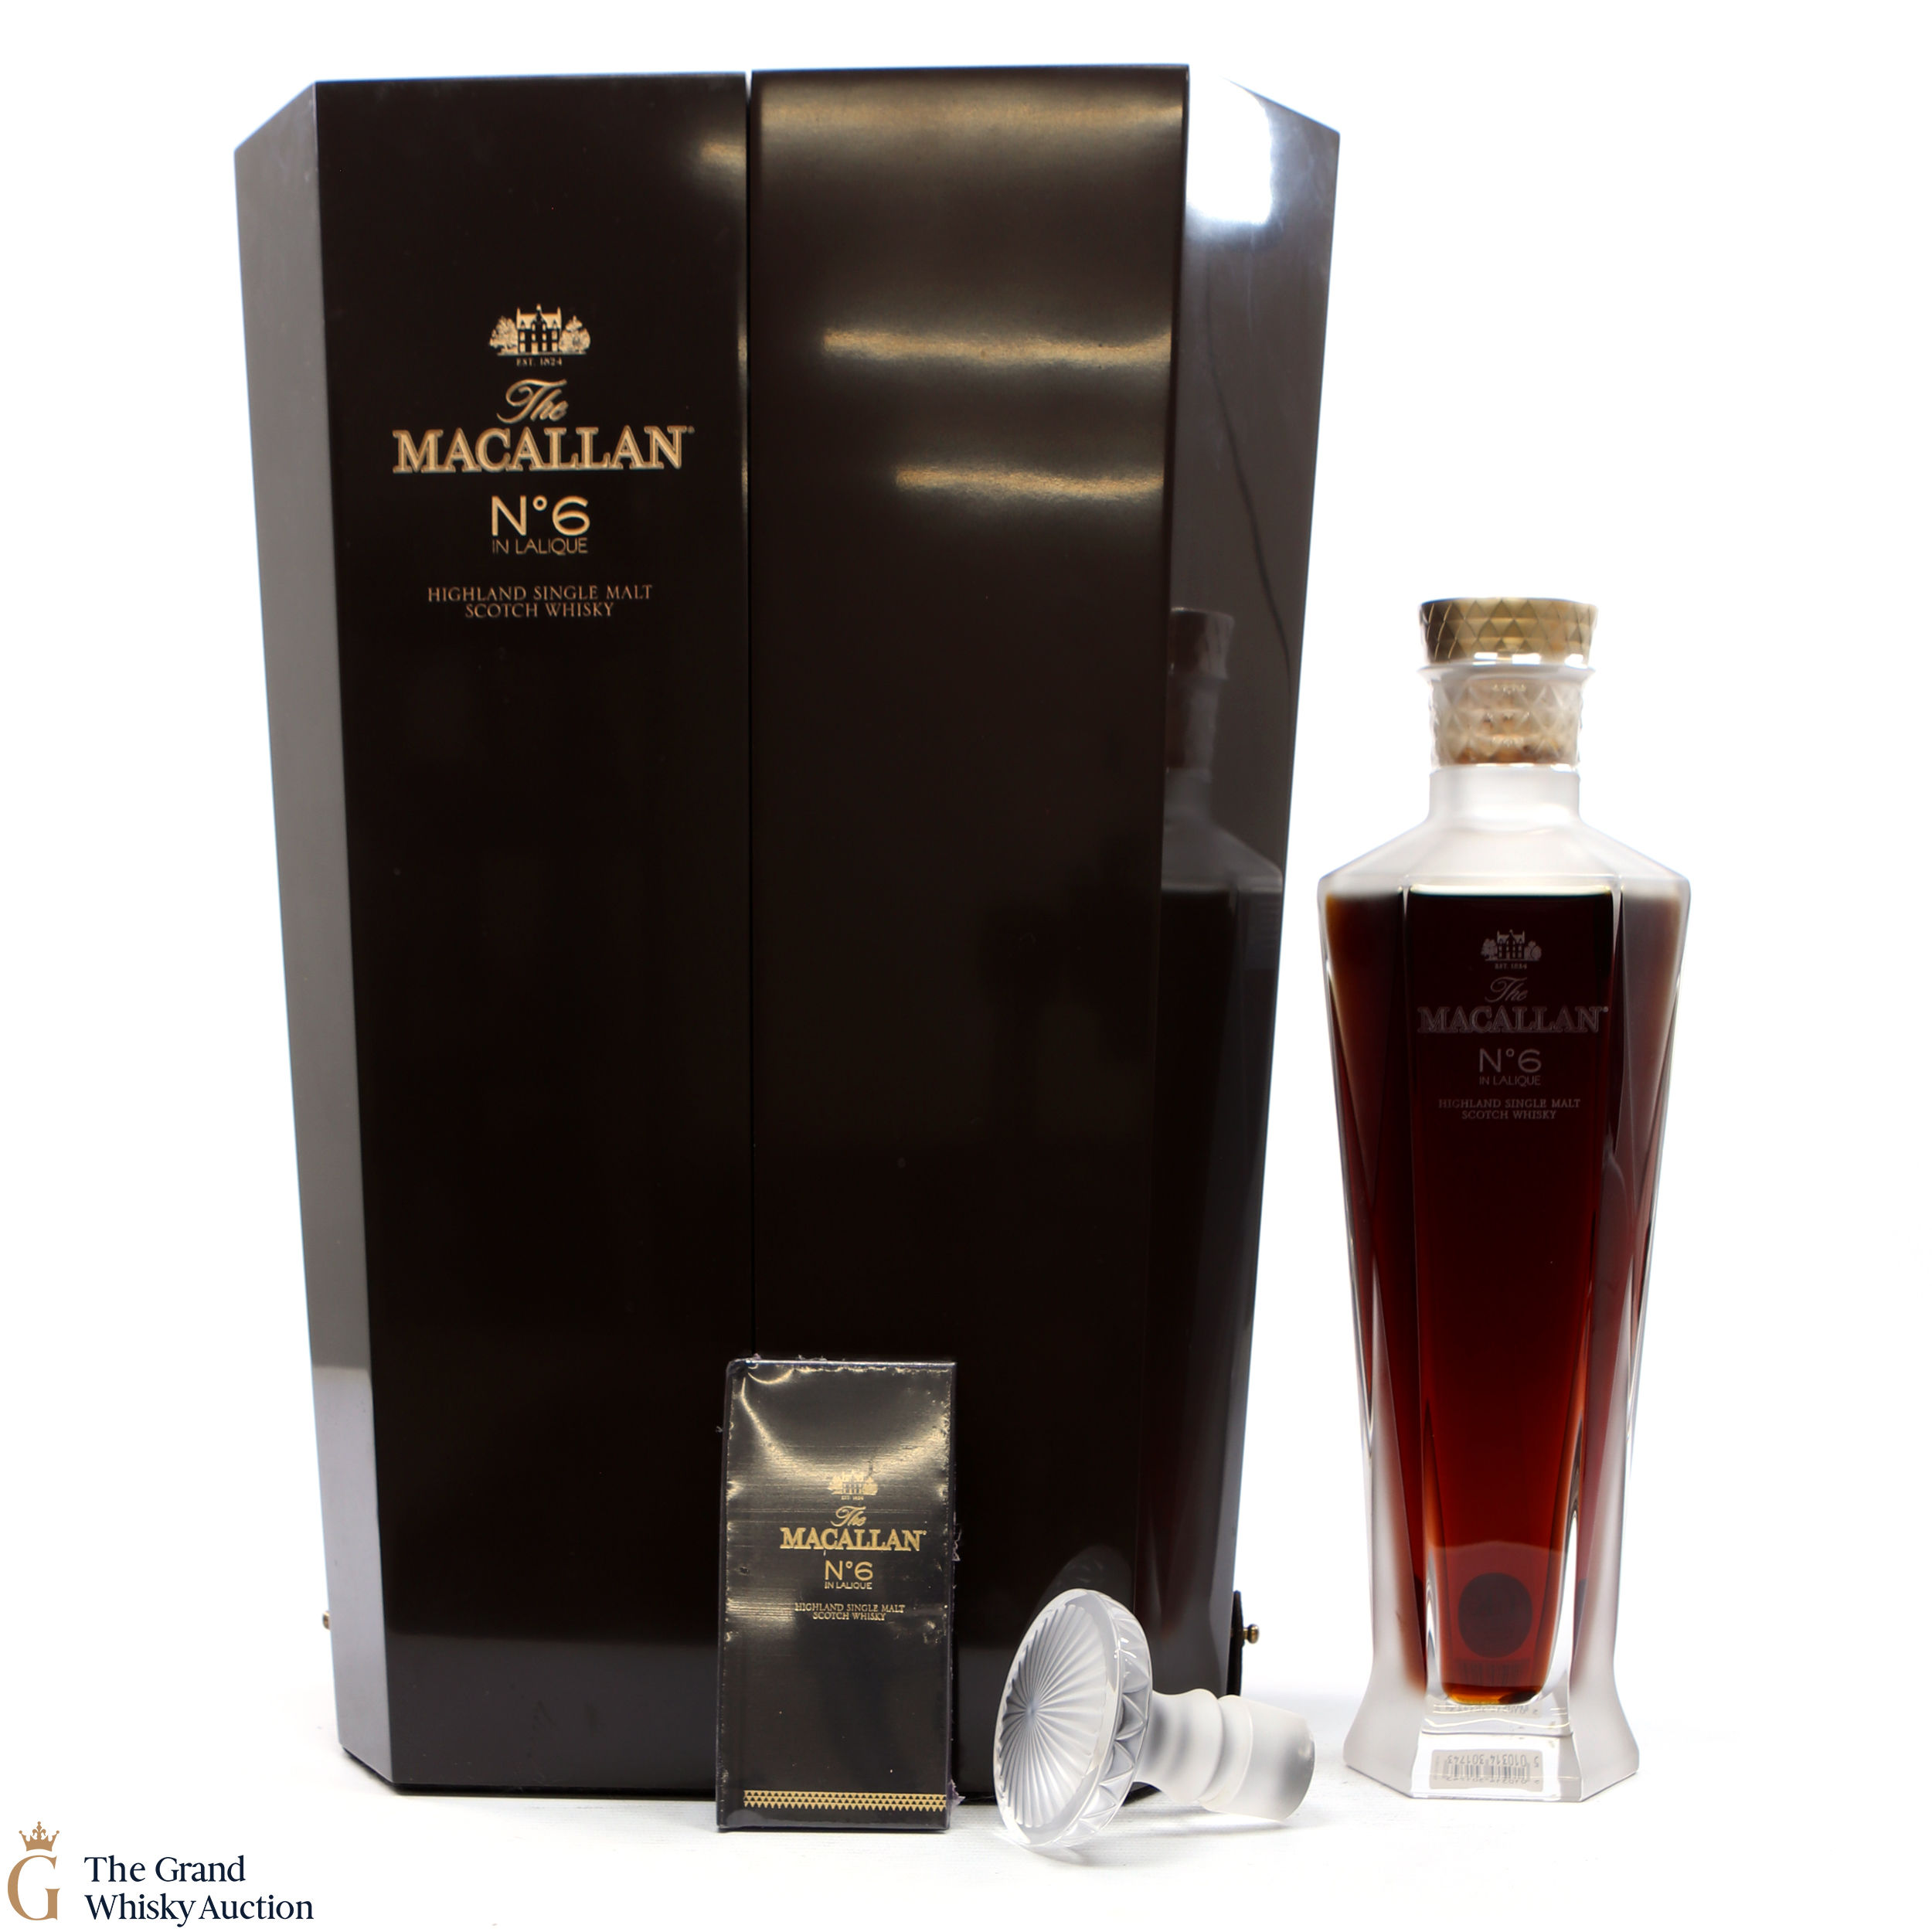 Macallan - No.6 in Lalique Decanter Auction | The Grand Whisky Auction